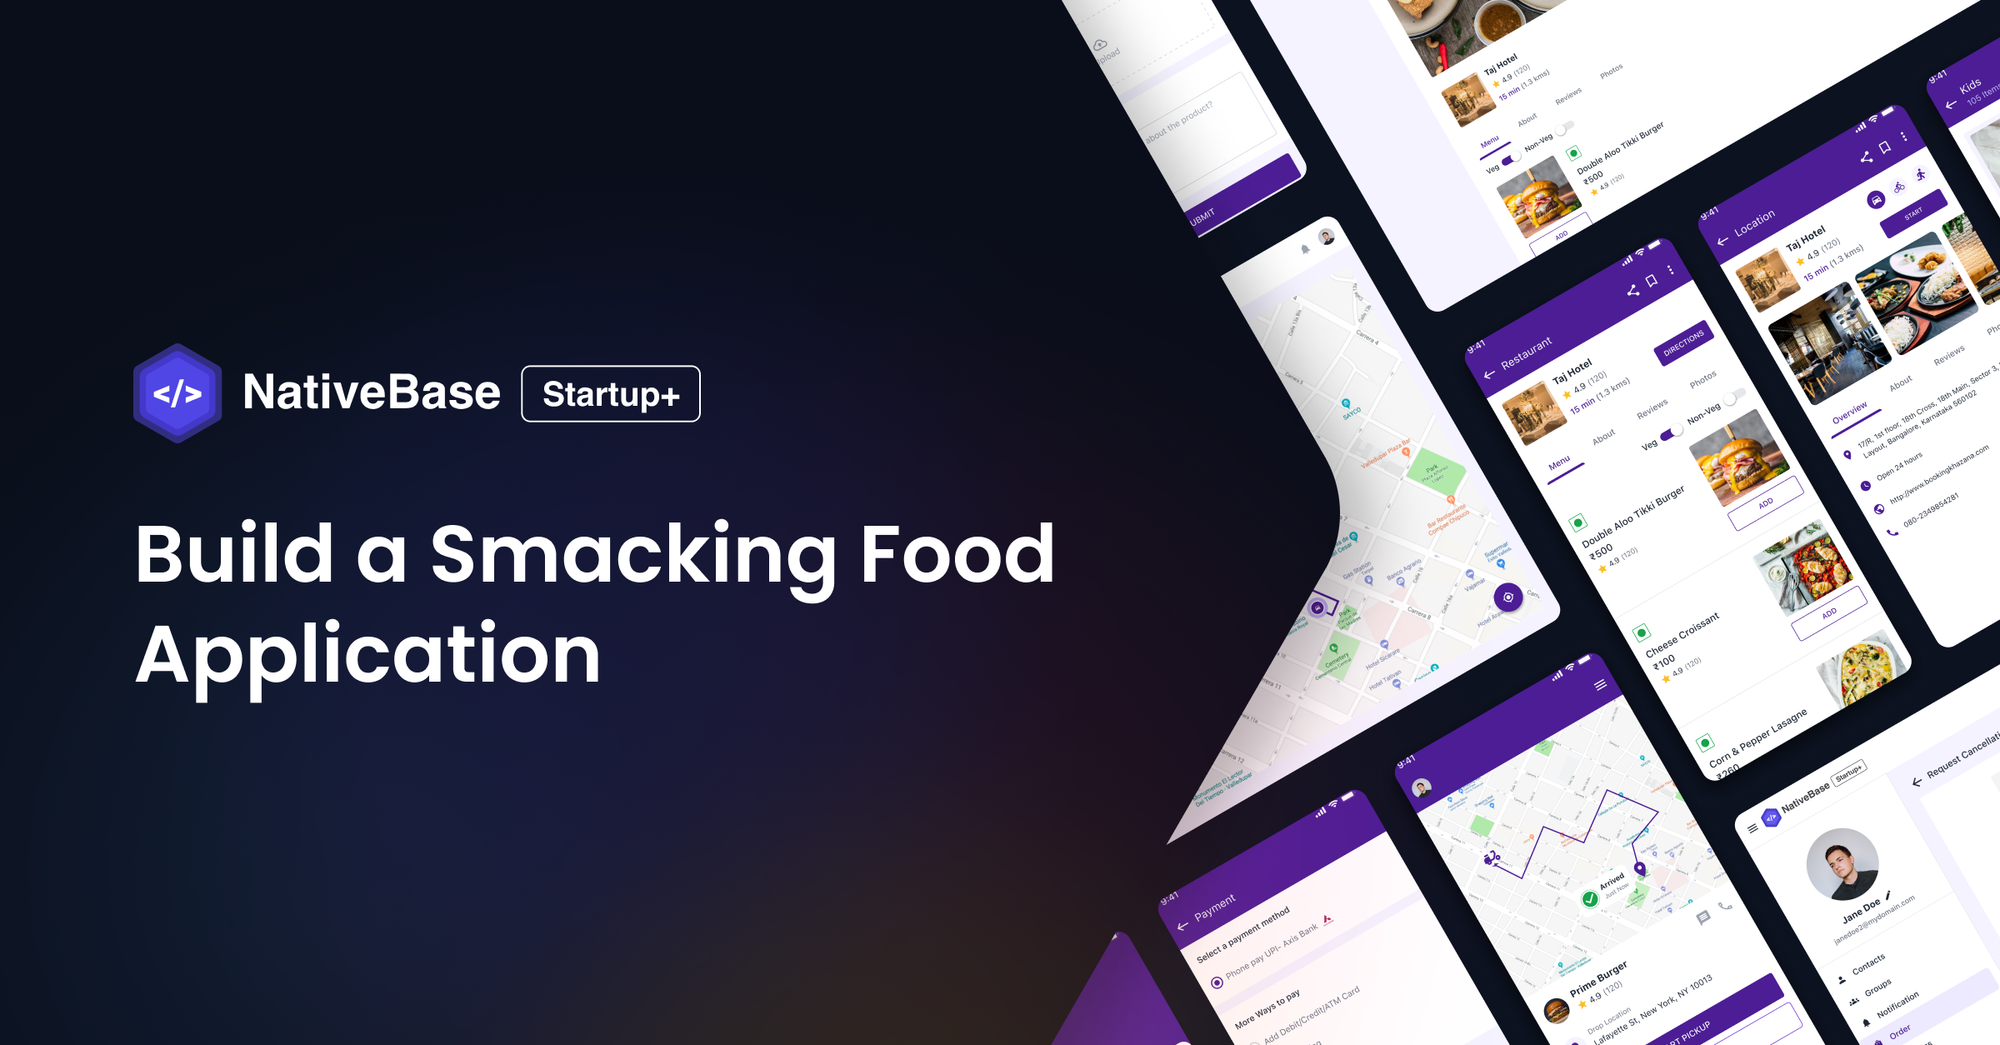 Build a Smacking Food Application